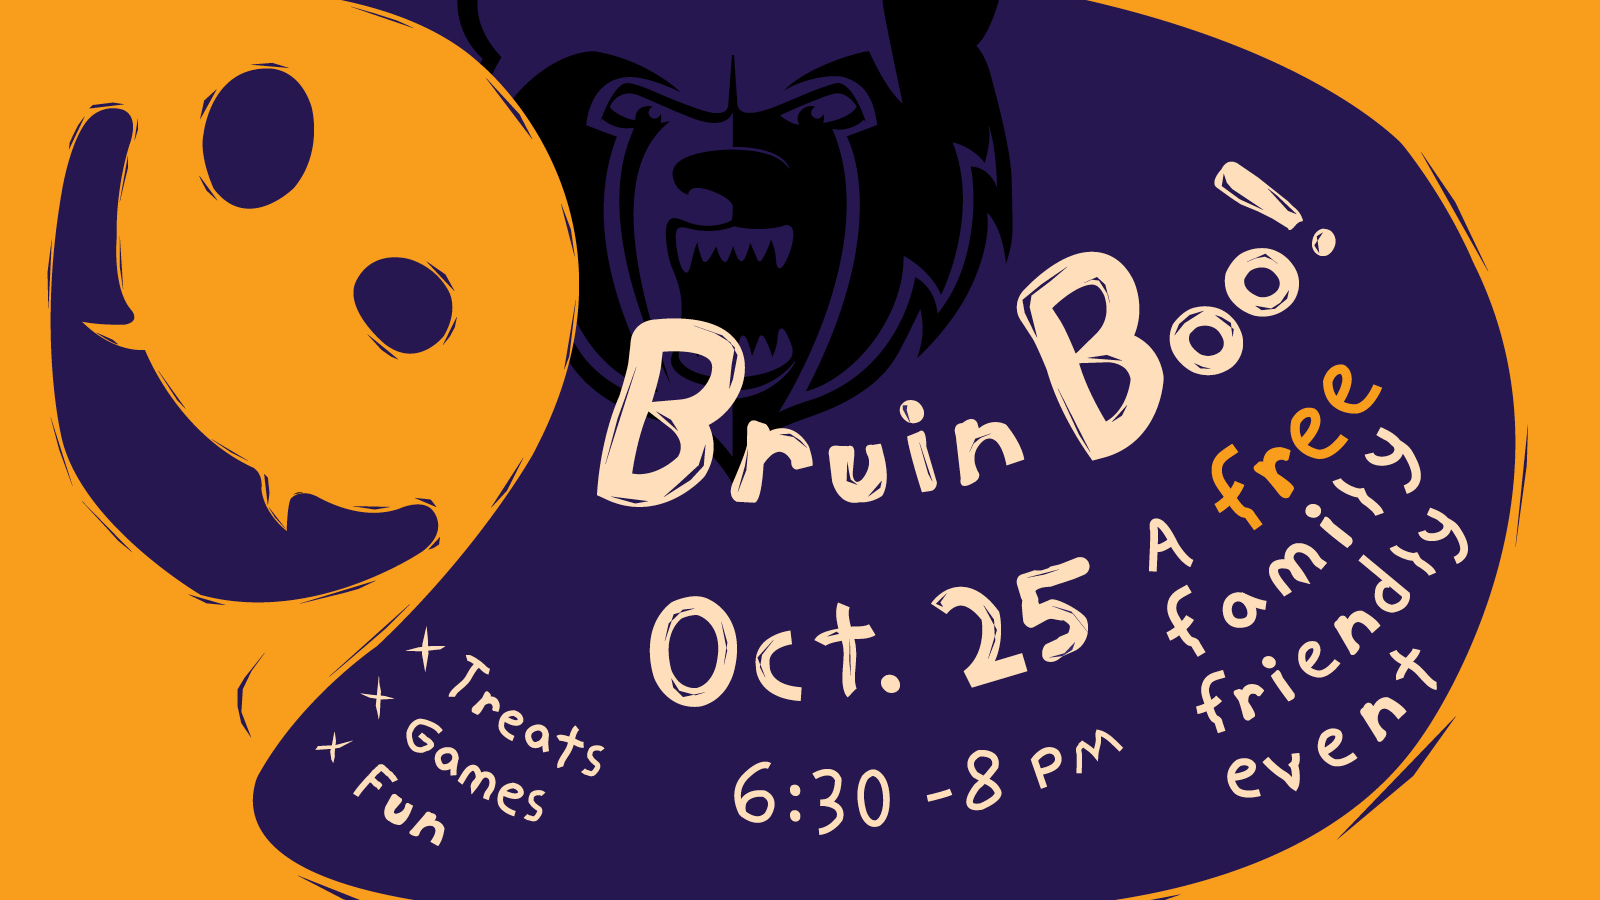 A digital slide picturing a graphic of a ghost with information about KCC's 2018 Bruin Boo Halloween event, scheduled for 6:30 to 8 p.m. Oct. 25 on KCC's North Avenue campus in Battle Creek.